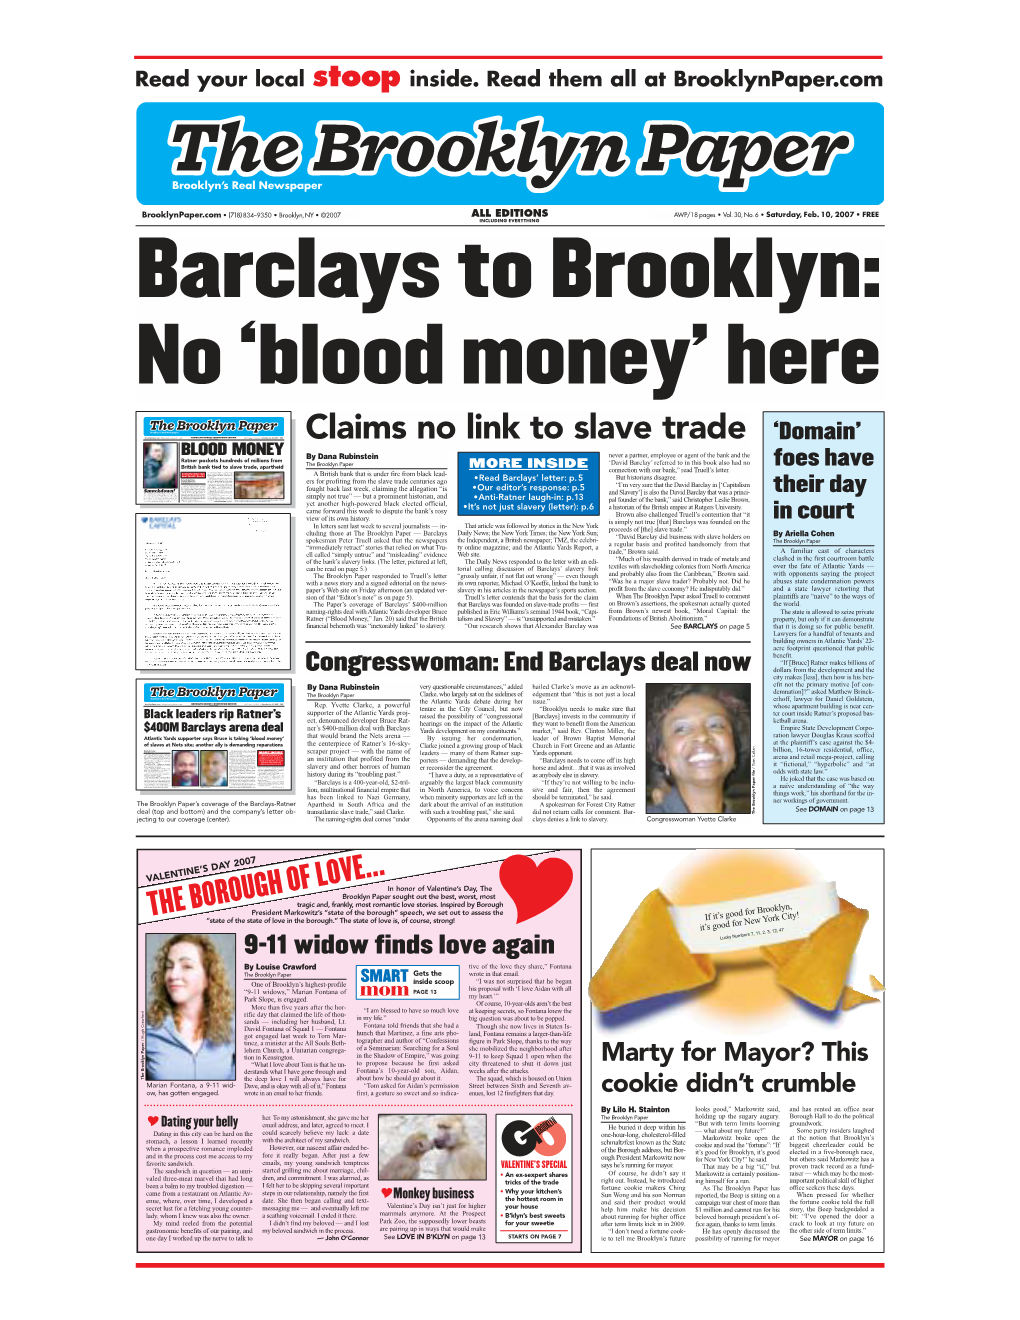 Brooklyn Paper MORE INSIDE Foes Have Just Tools Used by Ratner to Get This Project Connection with Our Bank,” Read Truell’S Letter